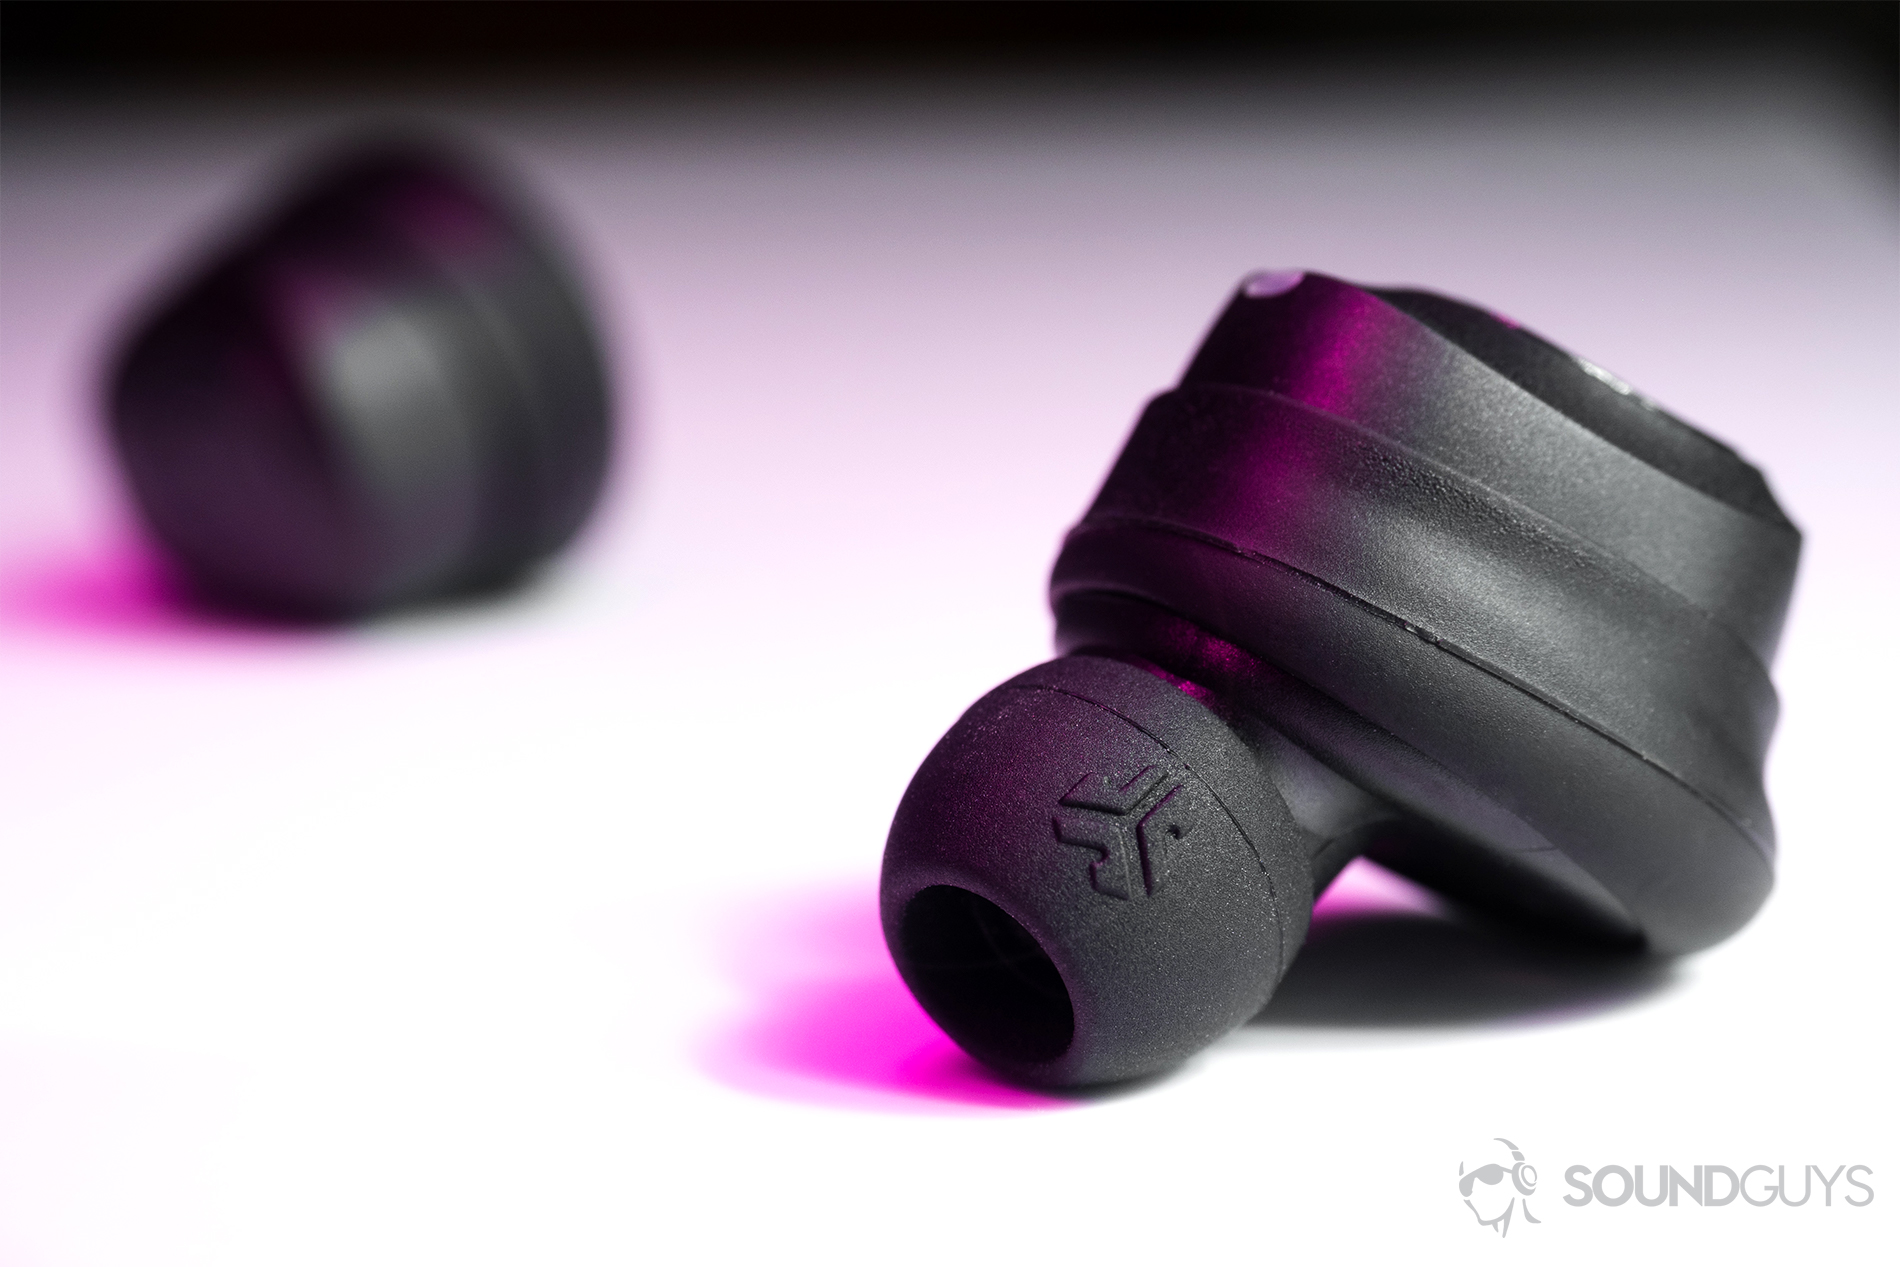 JLab  JBuds Air true wireless: A close-up of the earbuds showing the JLab  logo on the ear tips.